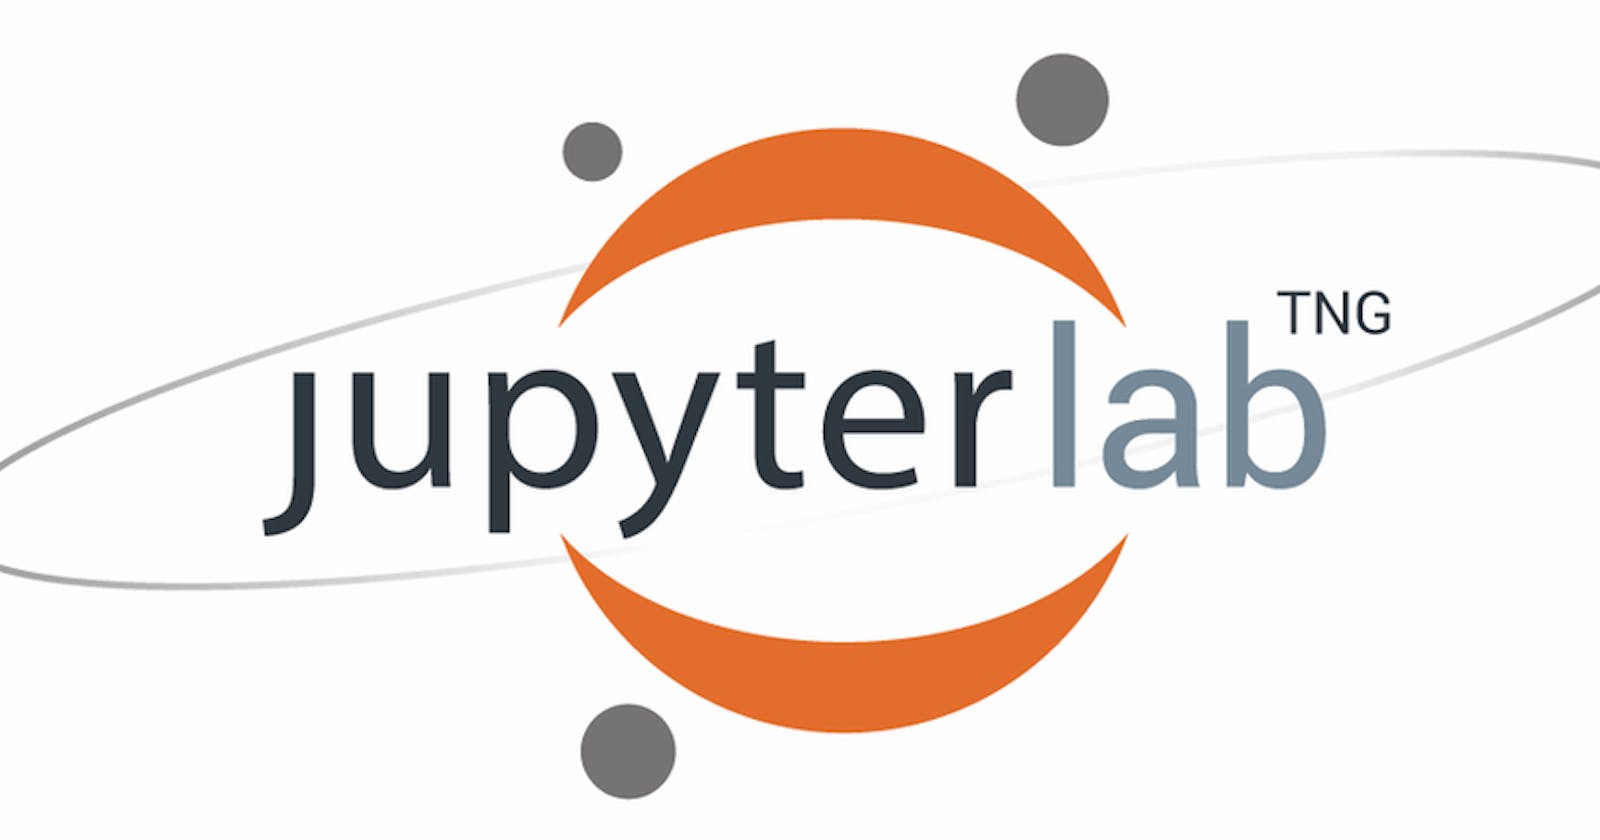 New Cool Features Came With JupyterLab 3.0